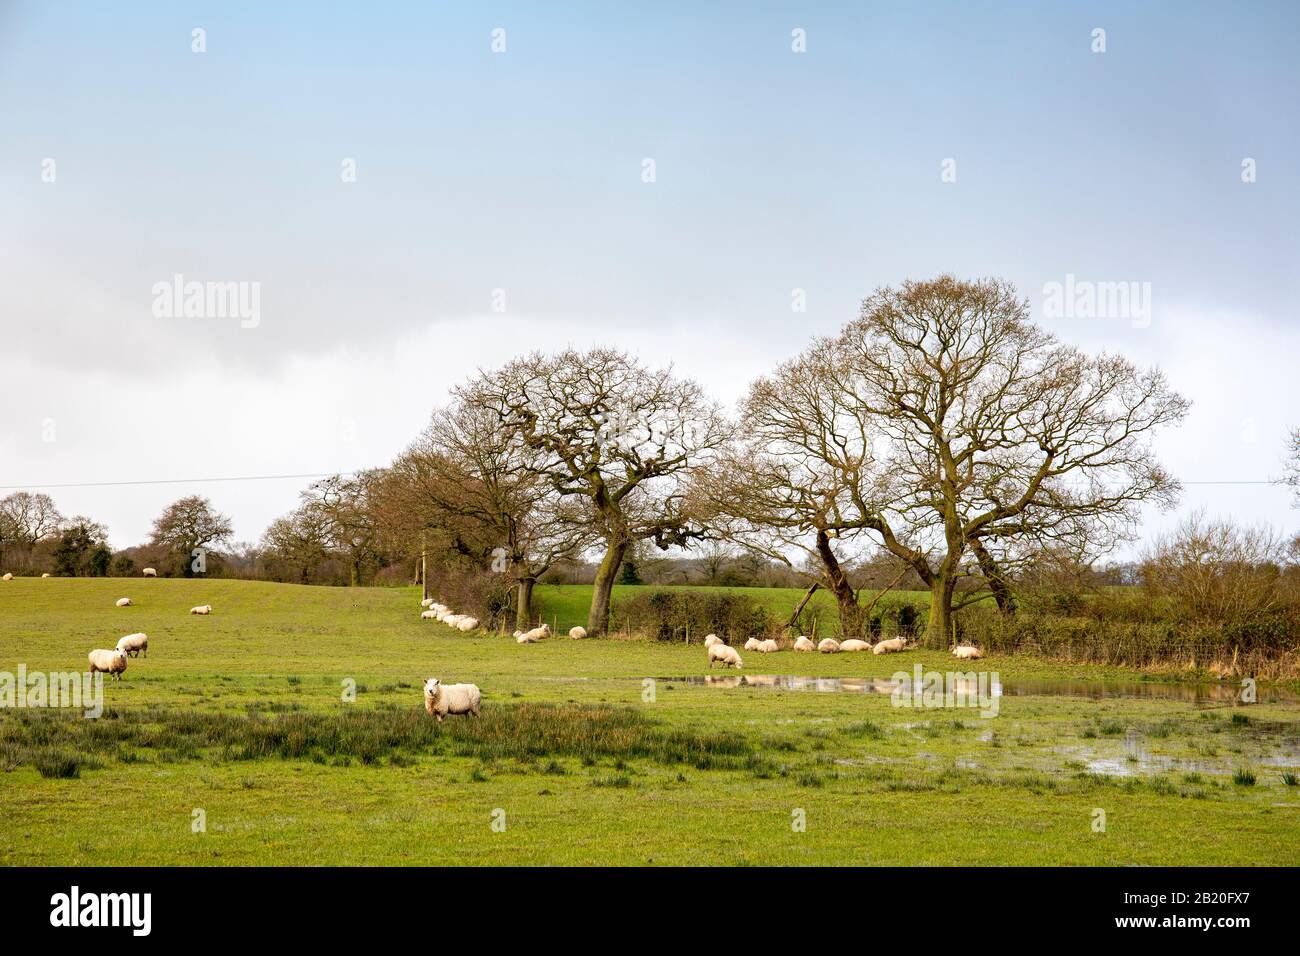 Flock of sheep sheltering under trees in wet field, Cheshire UK Stock Photo